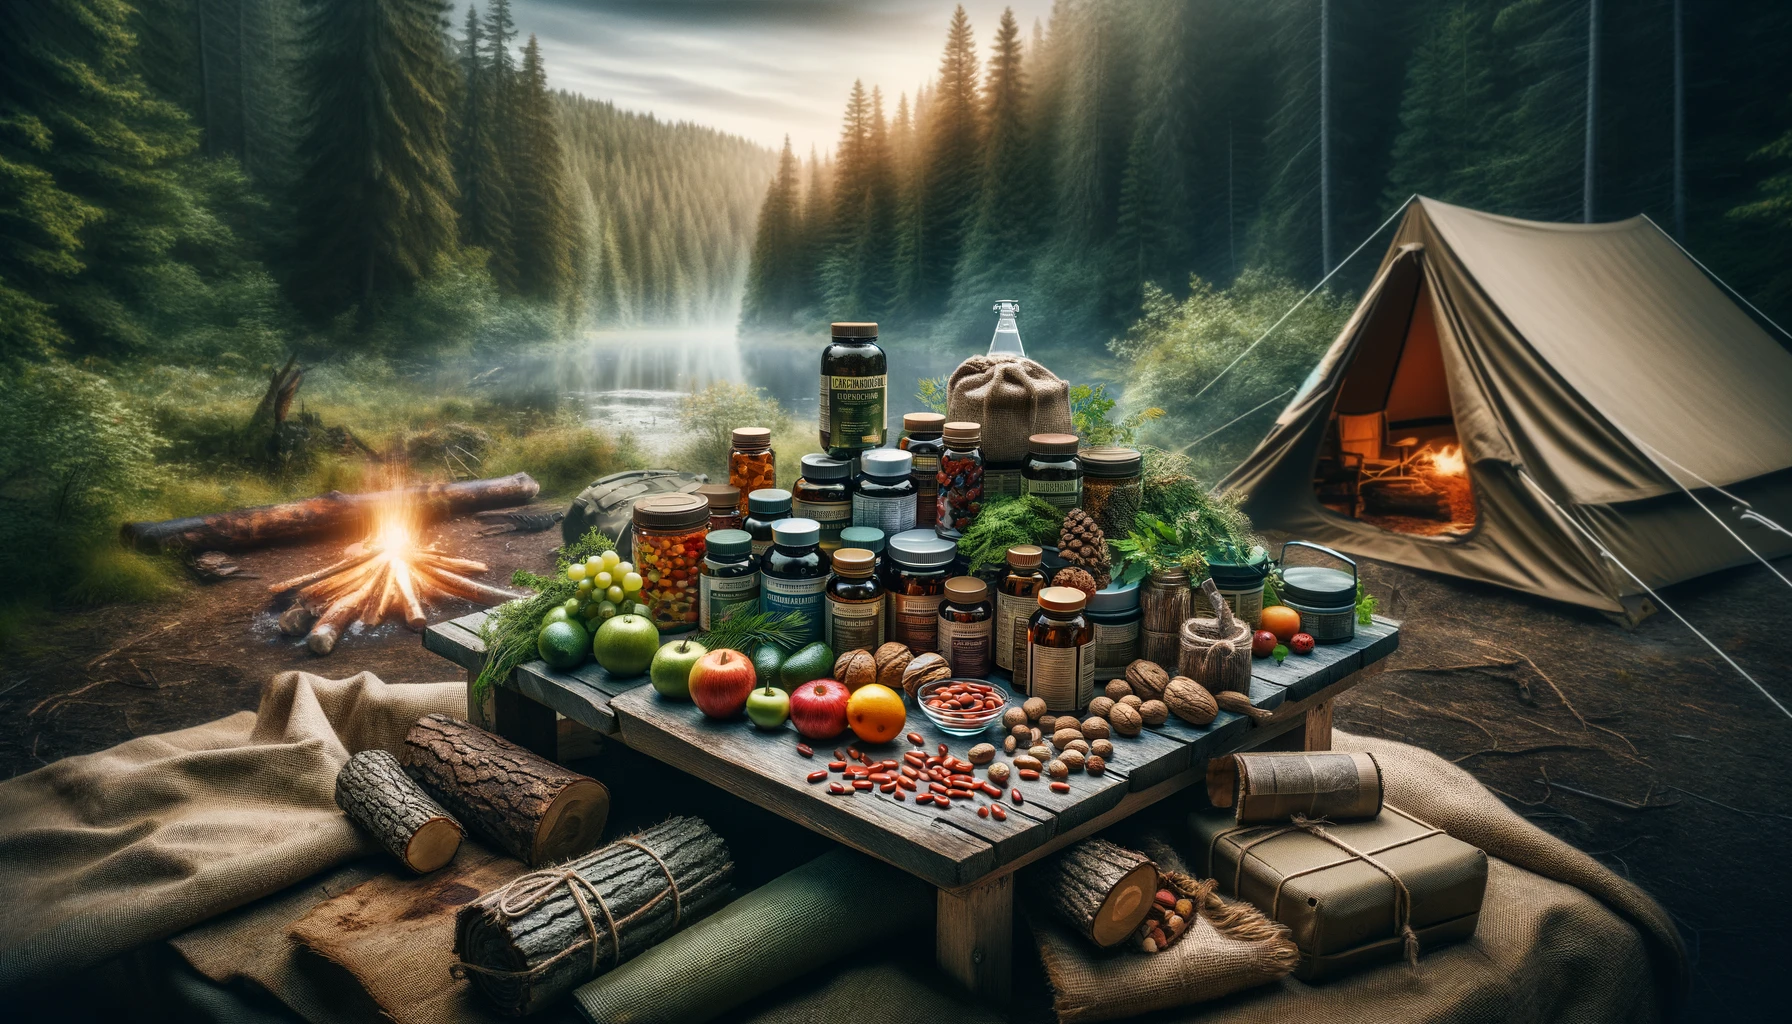 Engaging outdoor survival camp scene with essential vitamins and supplements on a wooden table, surrounded by natural food sources and survival gear, set in a dense forest with a tent and campfire, highlighting health and vitality in wilderness survival